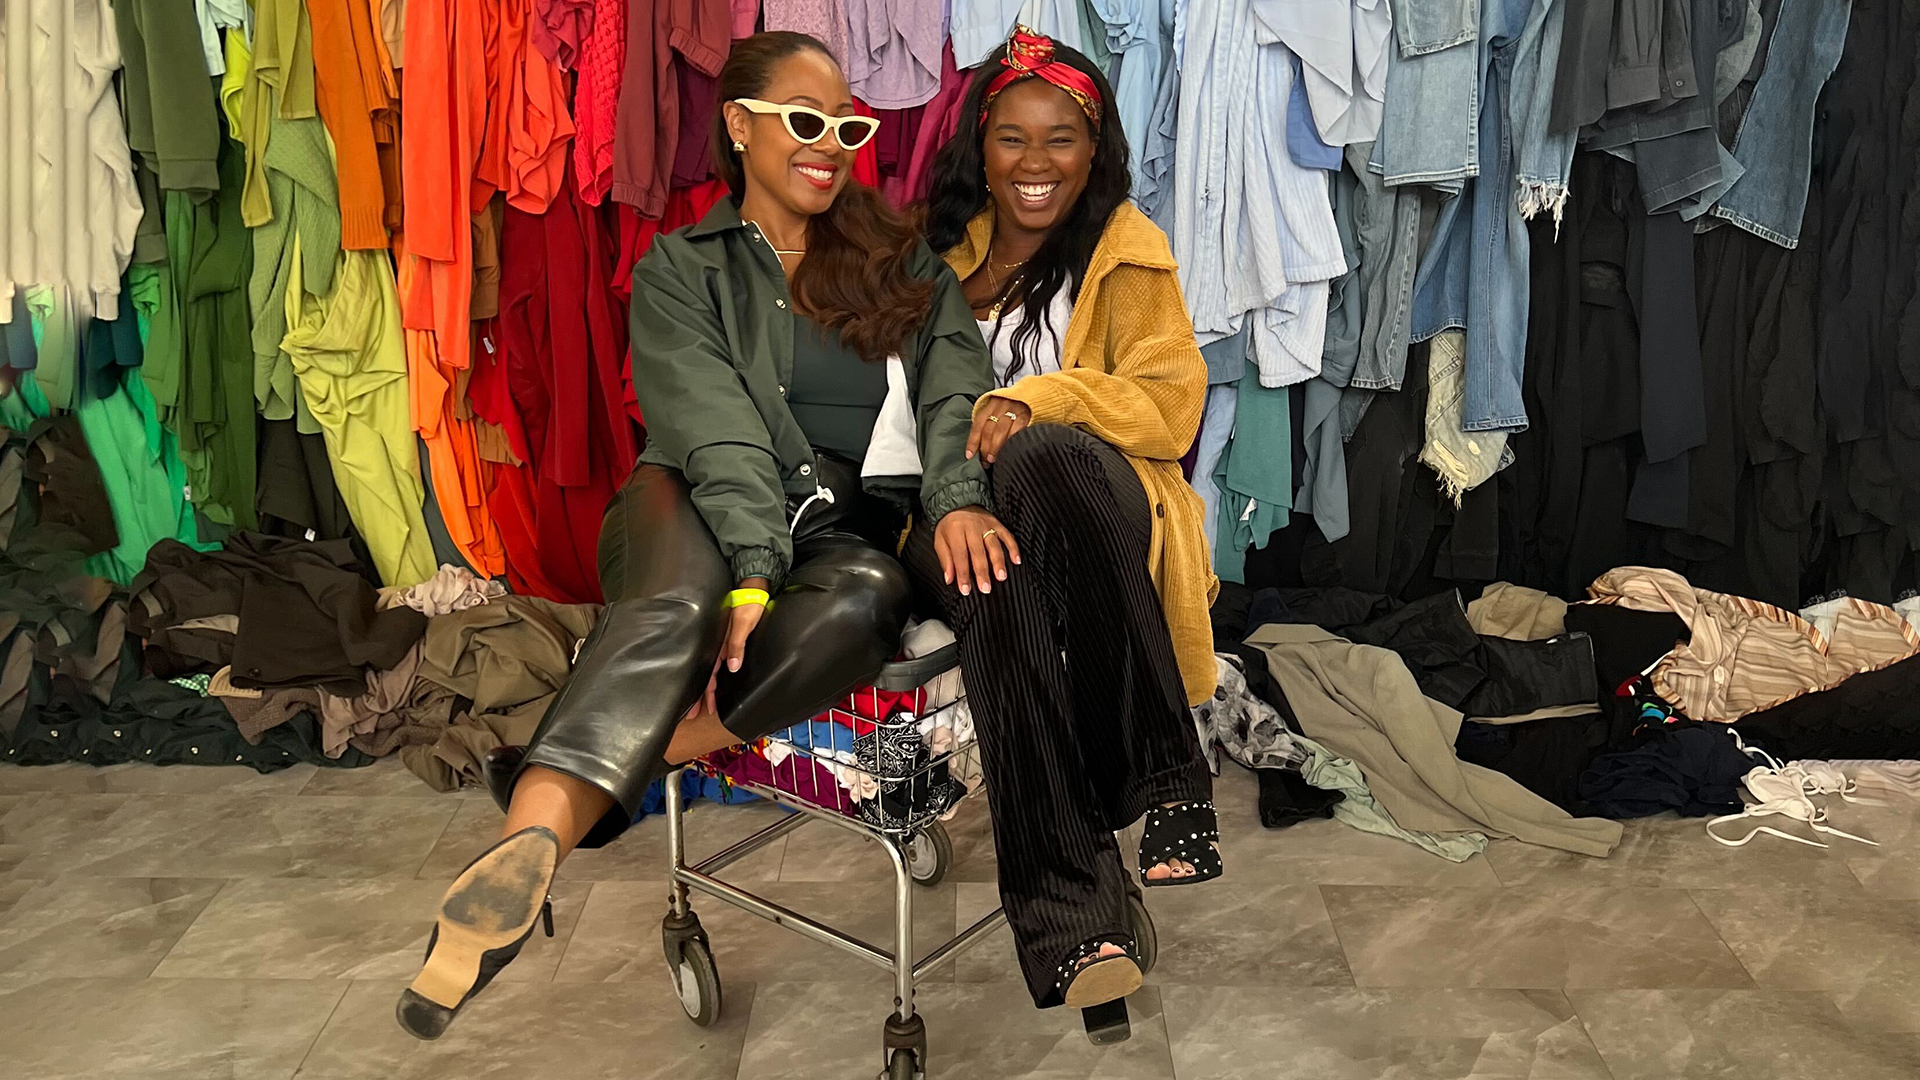 UpHouse team members Erica and Sade posing in a shopping cart in front of piles of clothing at CutlureCon 2022